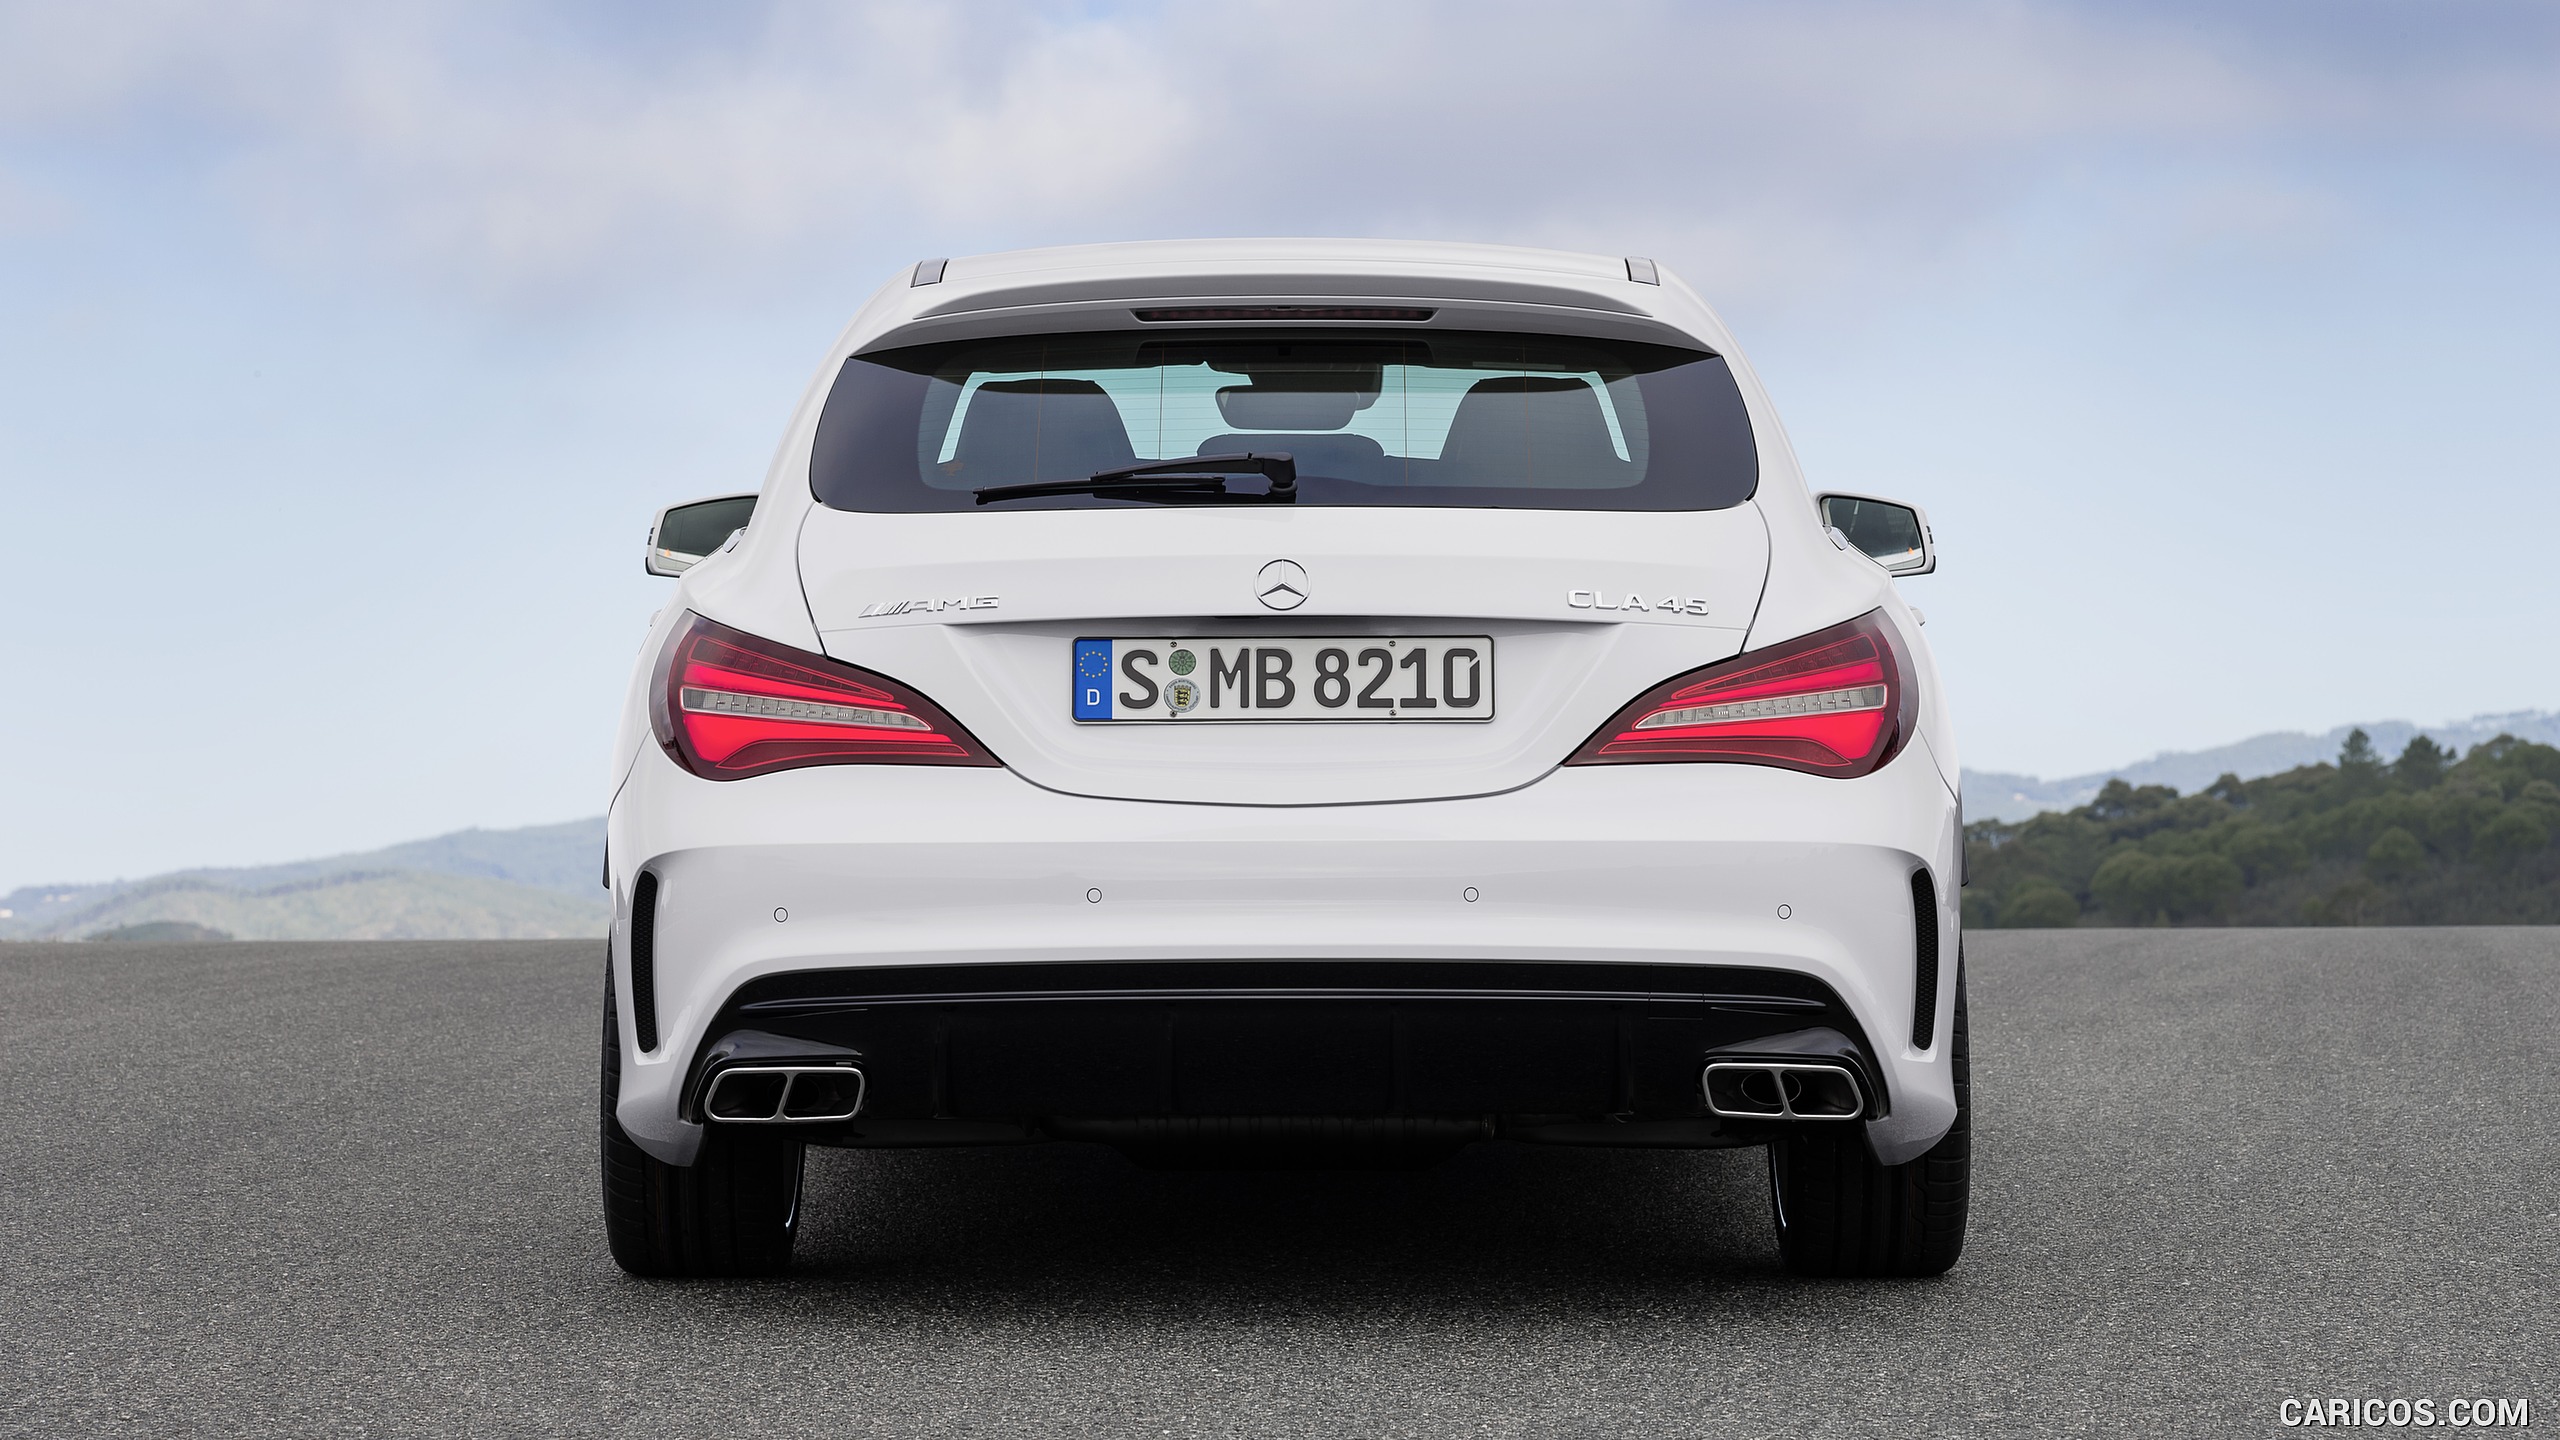 2017 Mercedes-AMG CLA 45 Shooting Brake (Chassis: X117, Color: Diamond White) - Rear, #11 of 48